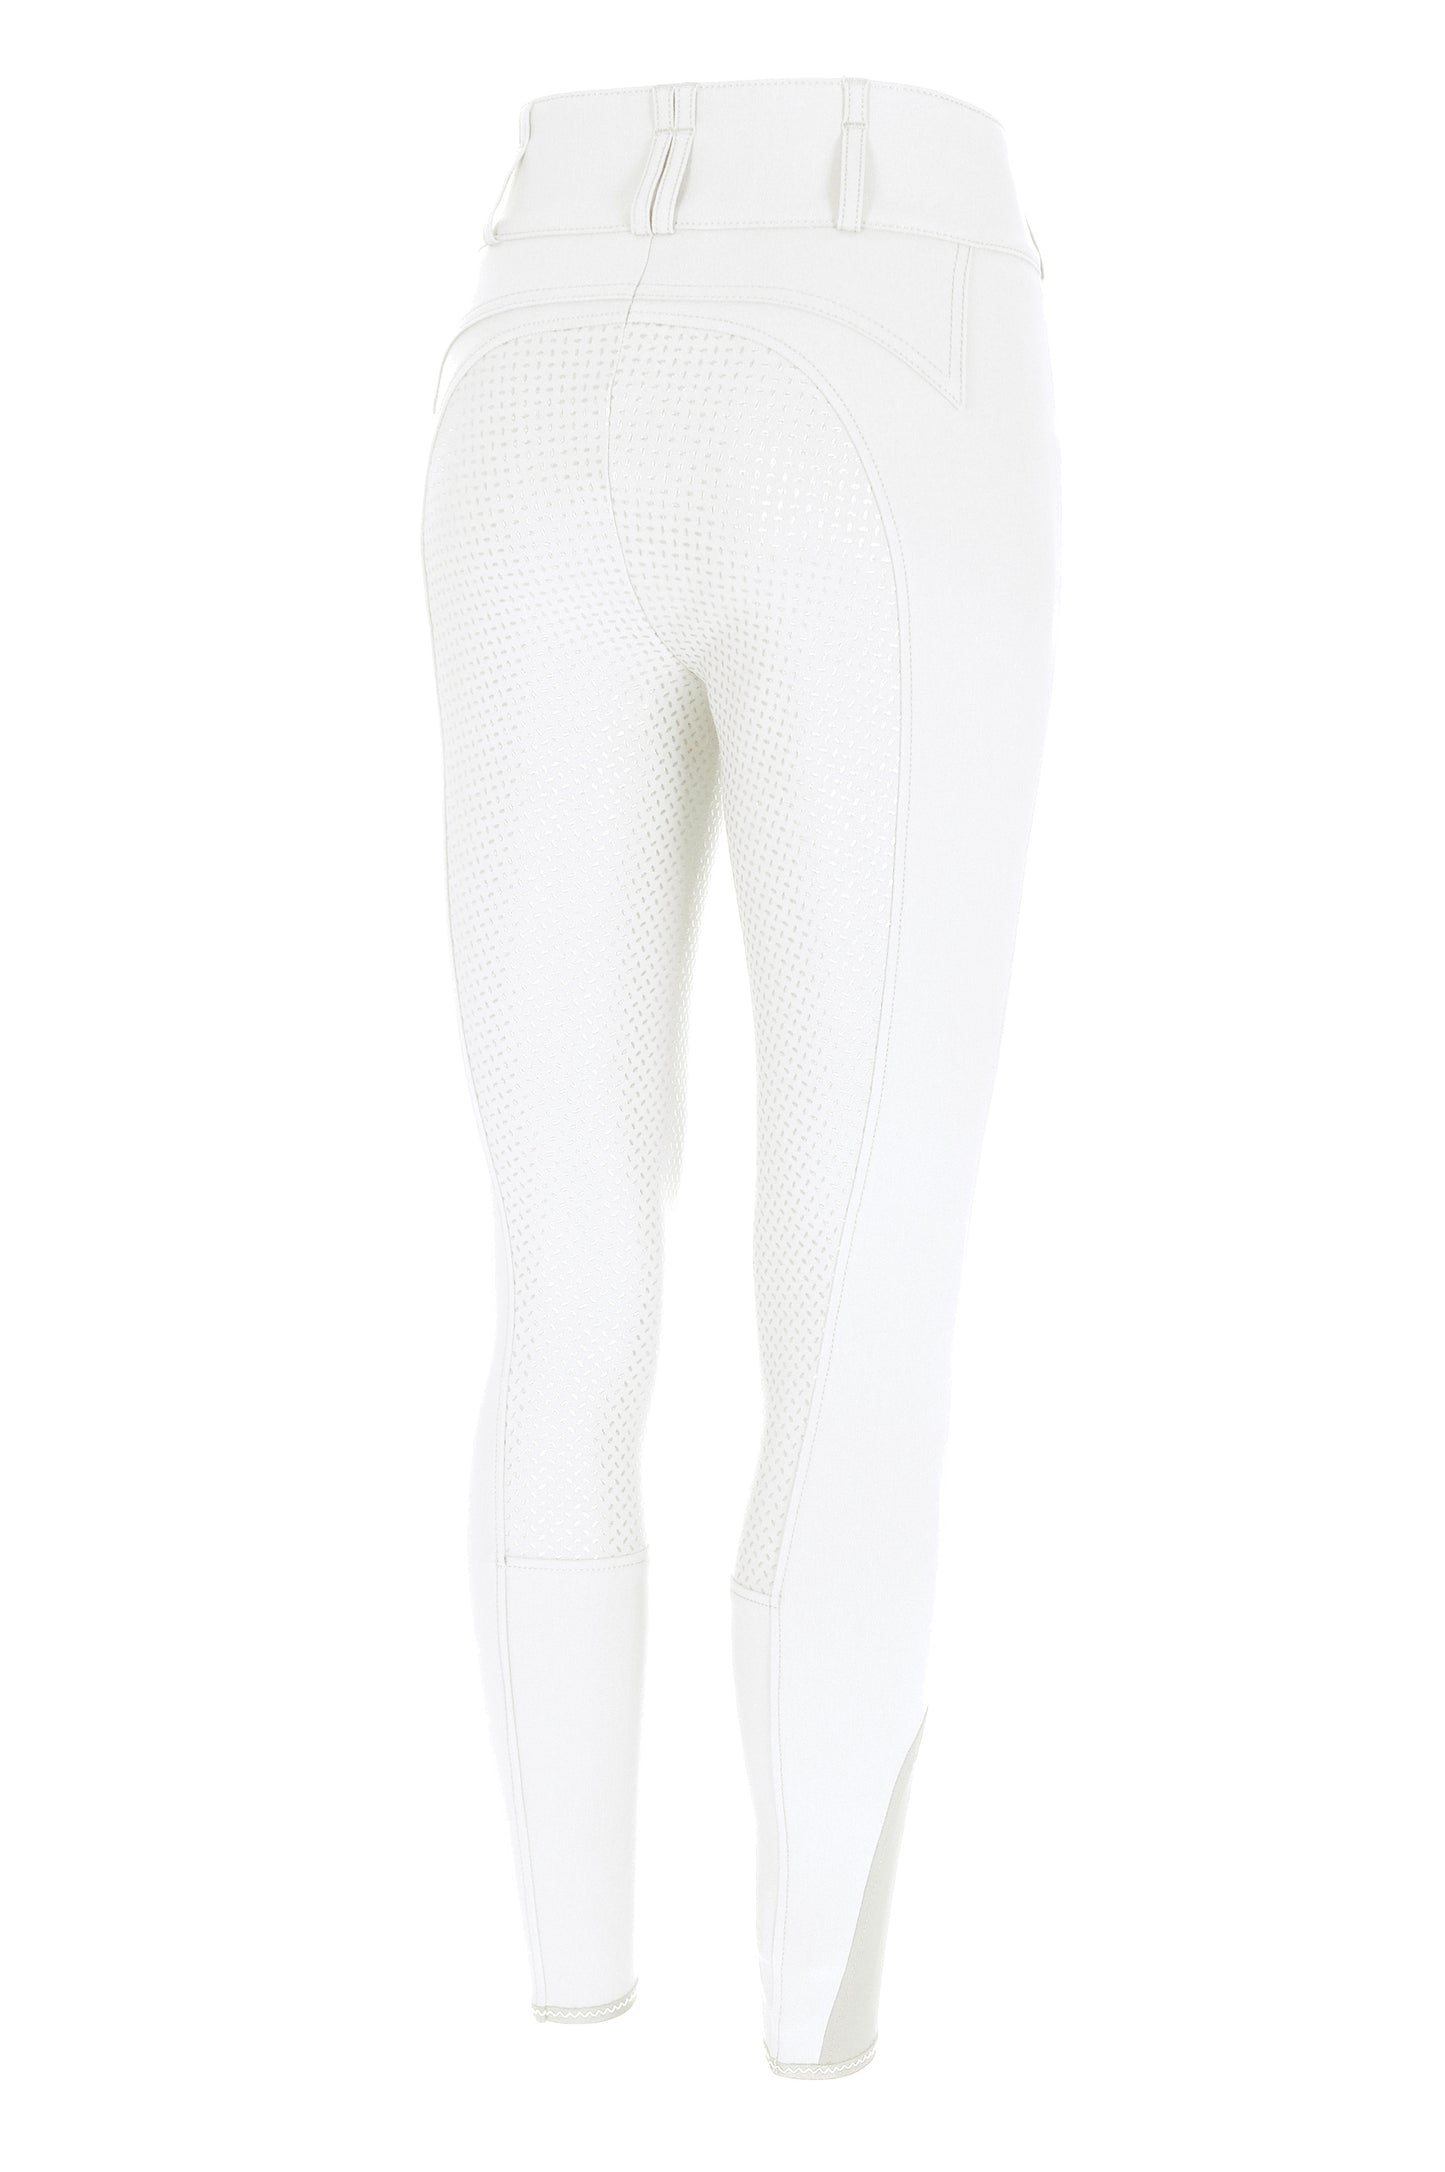 Pikeur Candela Breeches - Ladies Competition - Full Grip